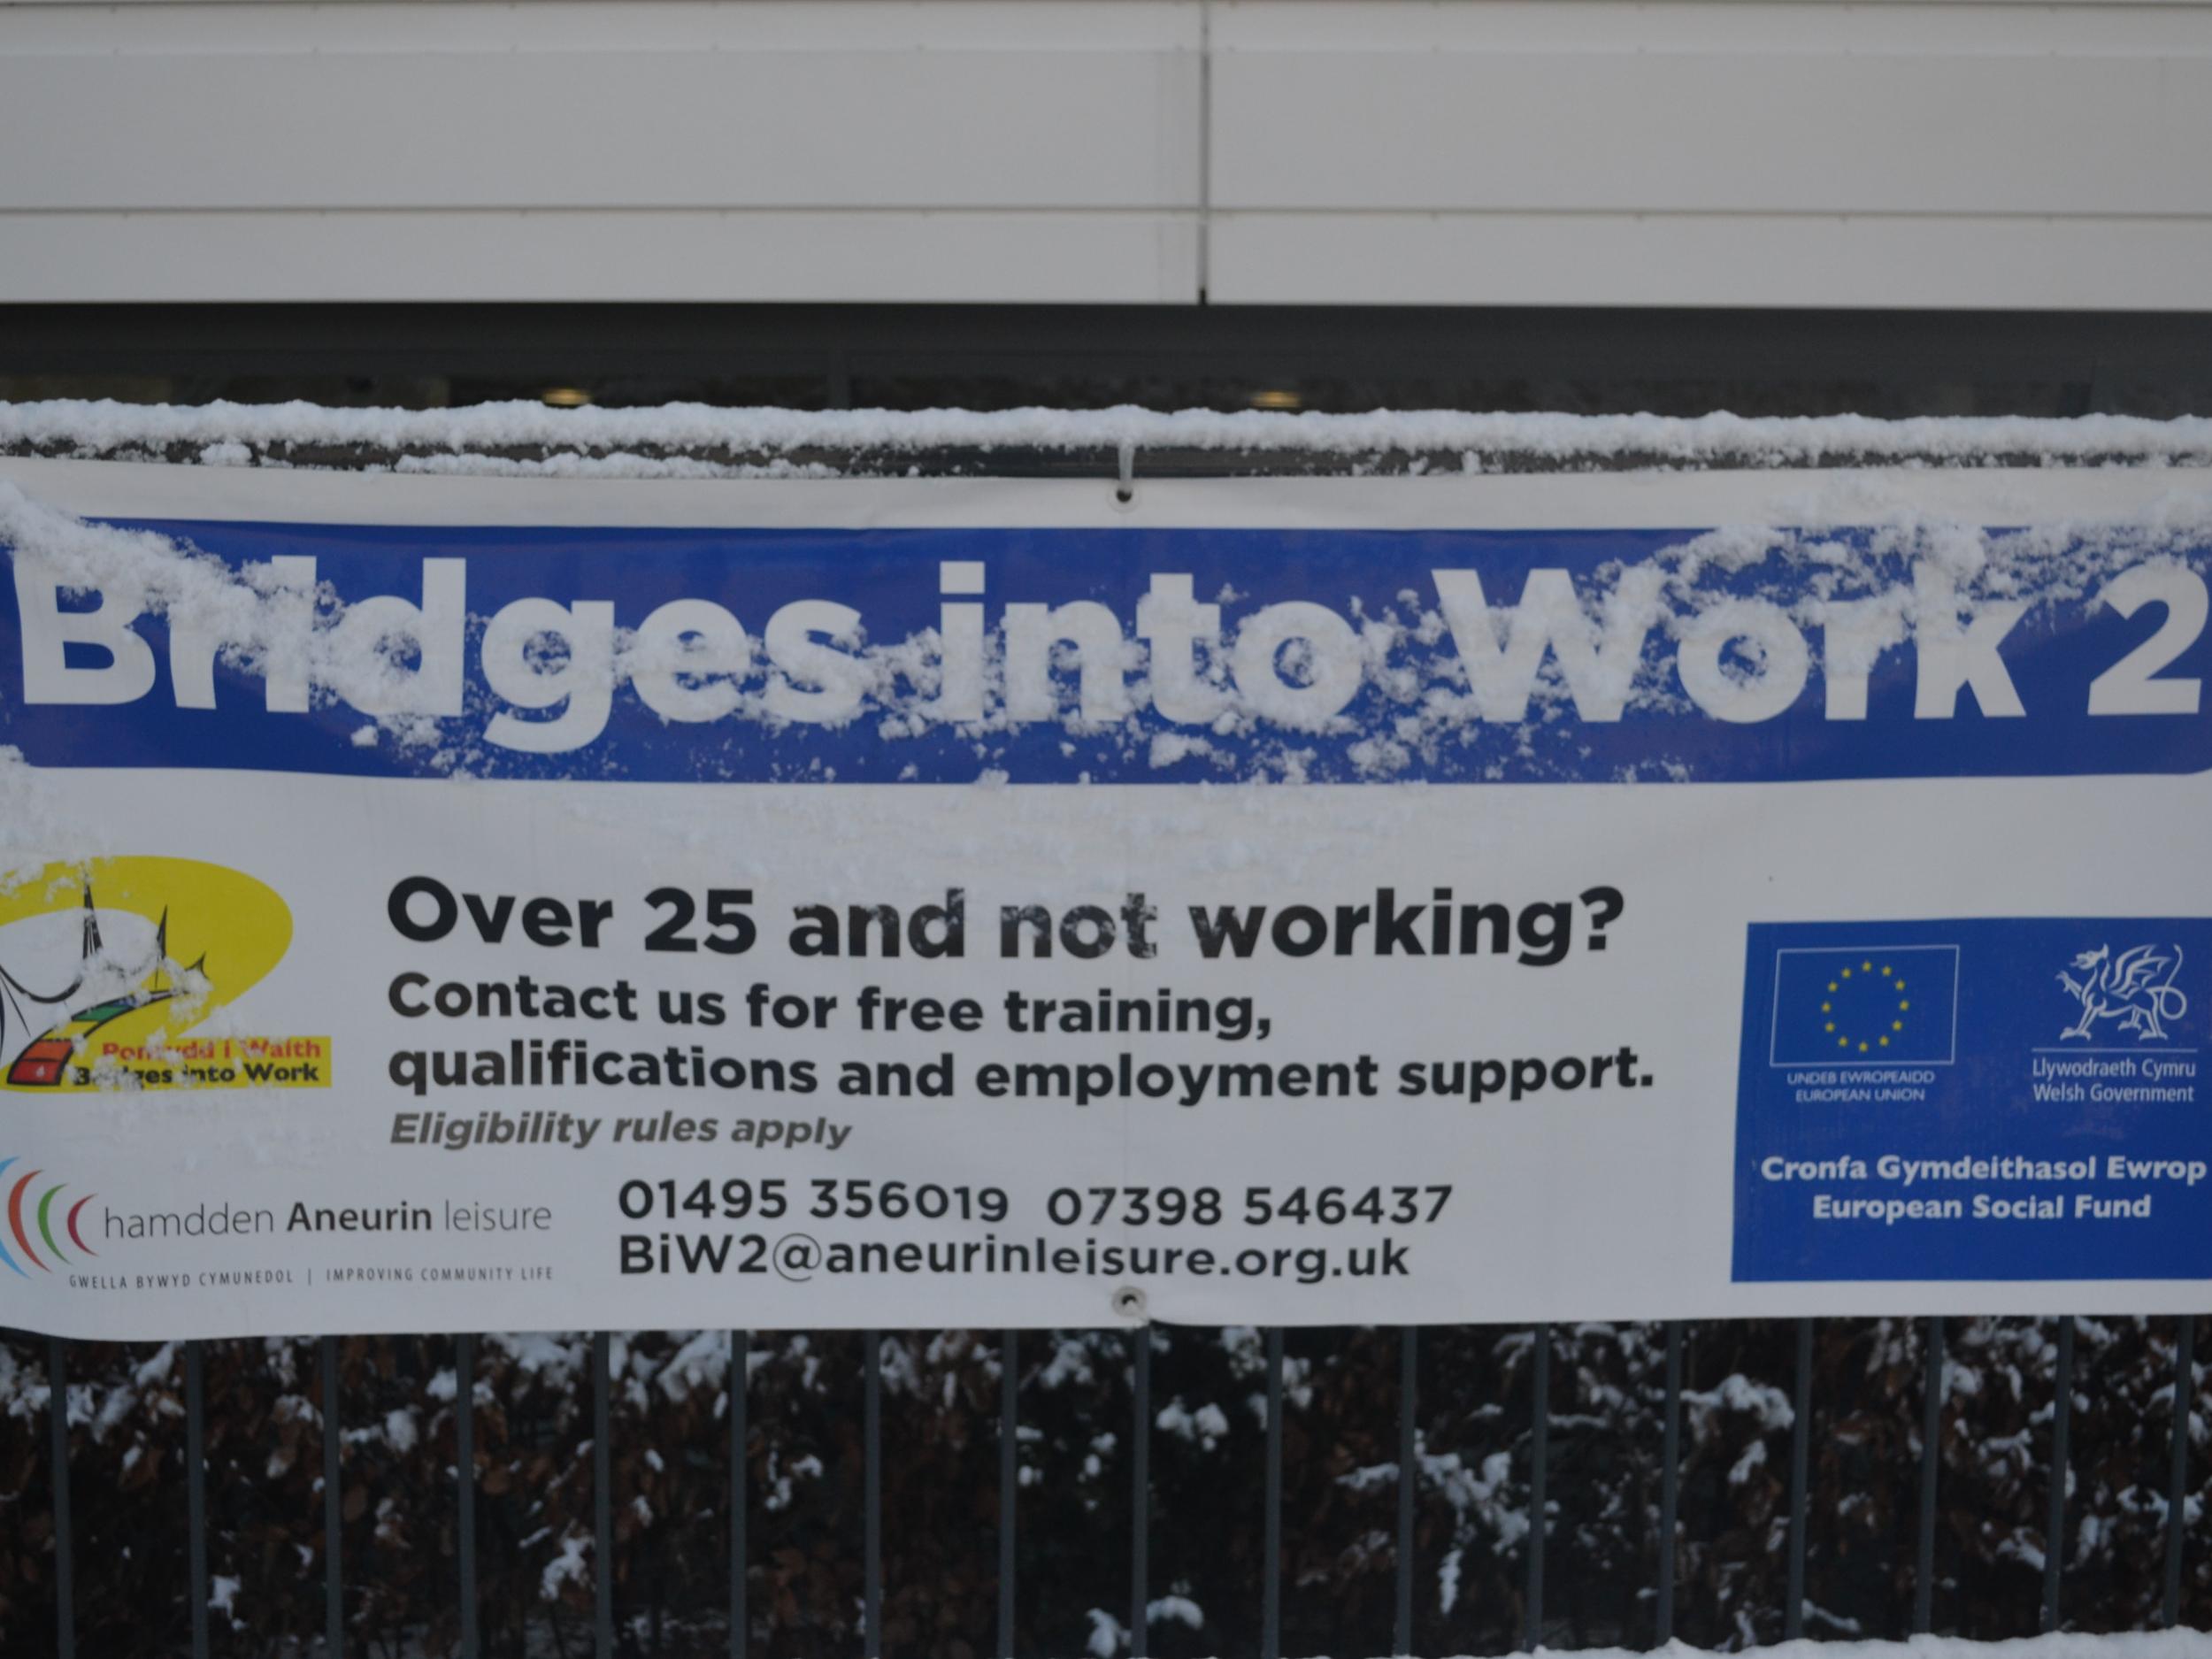 A sign of Blaenau Gwent’s enduring problems or the EU’s efforts to address them? The banner outside the new sports centre, on the site of the old steelworks site